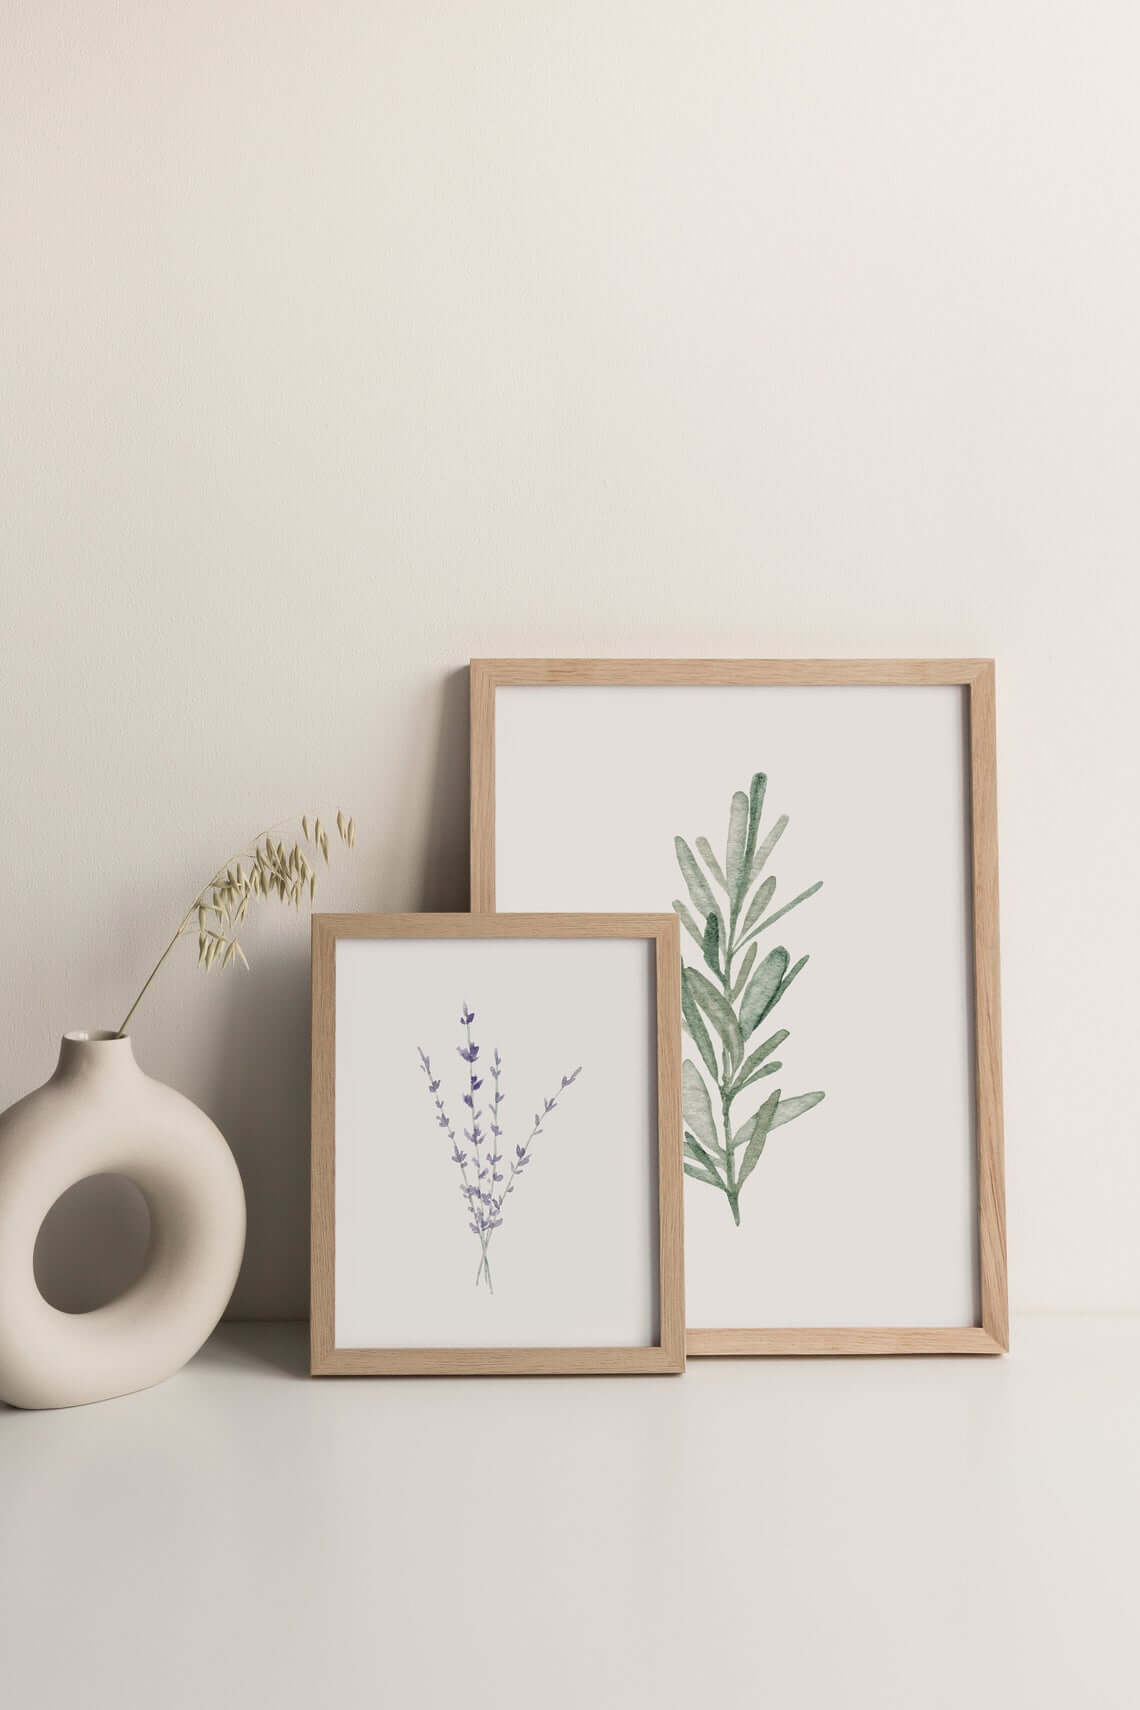 Rosemary and Lavender Art Prints